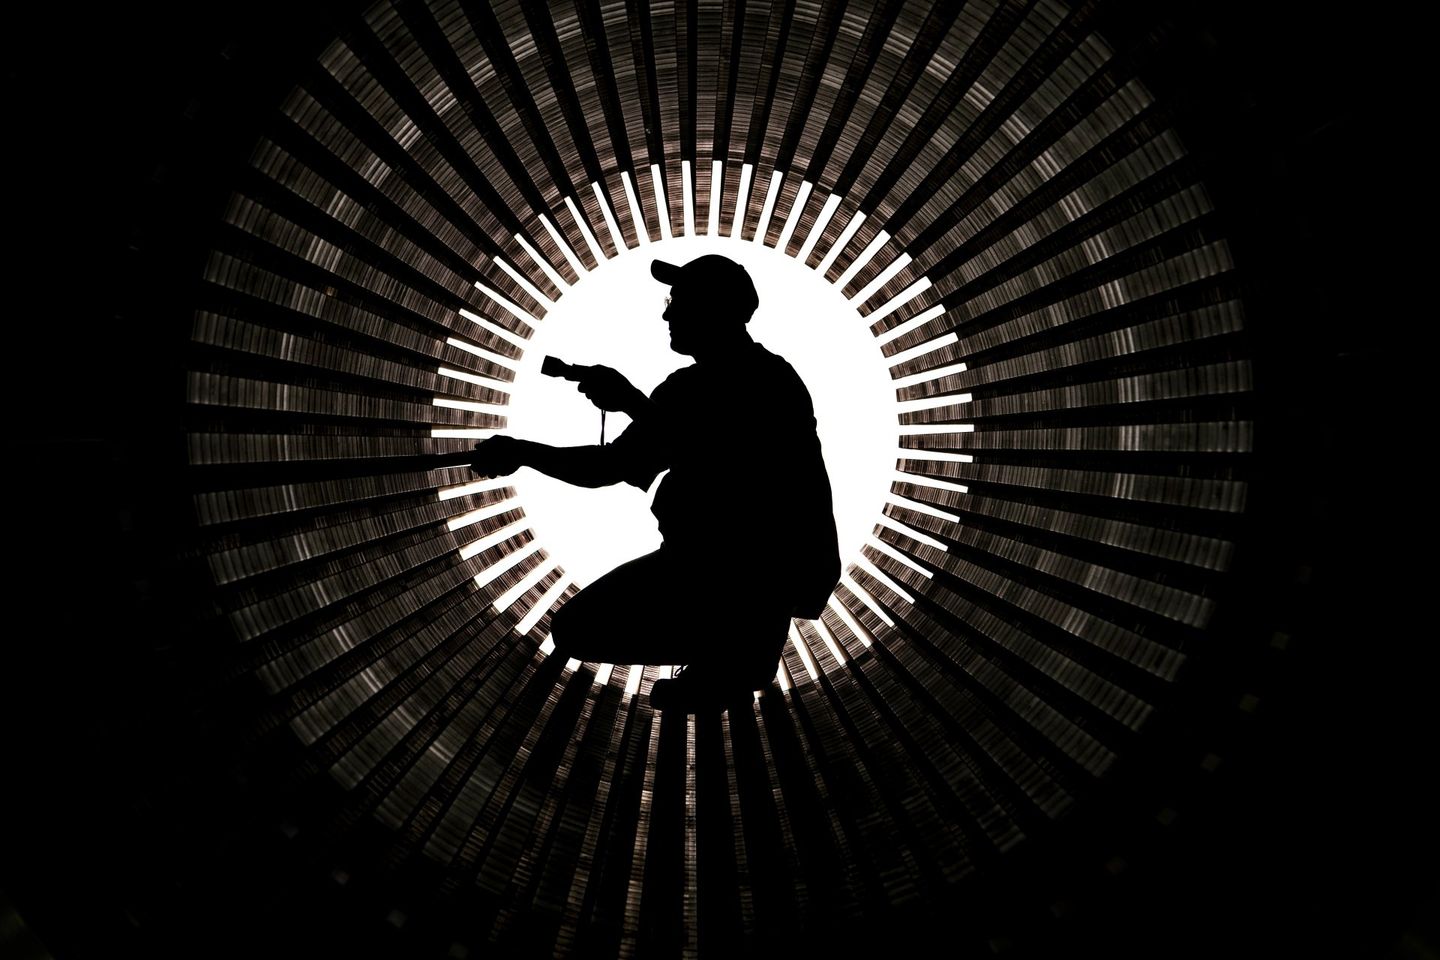 Photo shows the silhouette of an industrial mechanic working inside of a large turbine engine. The engine is still in the manufacturing facility. 